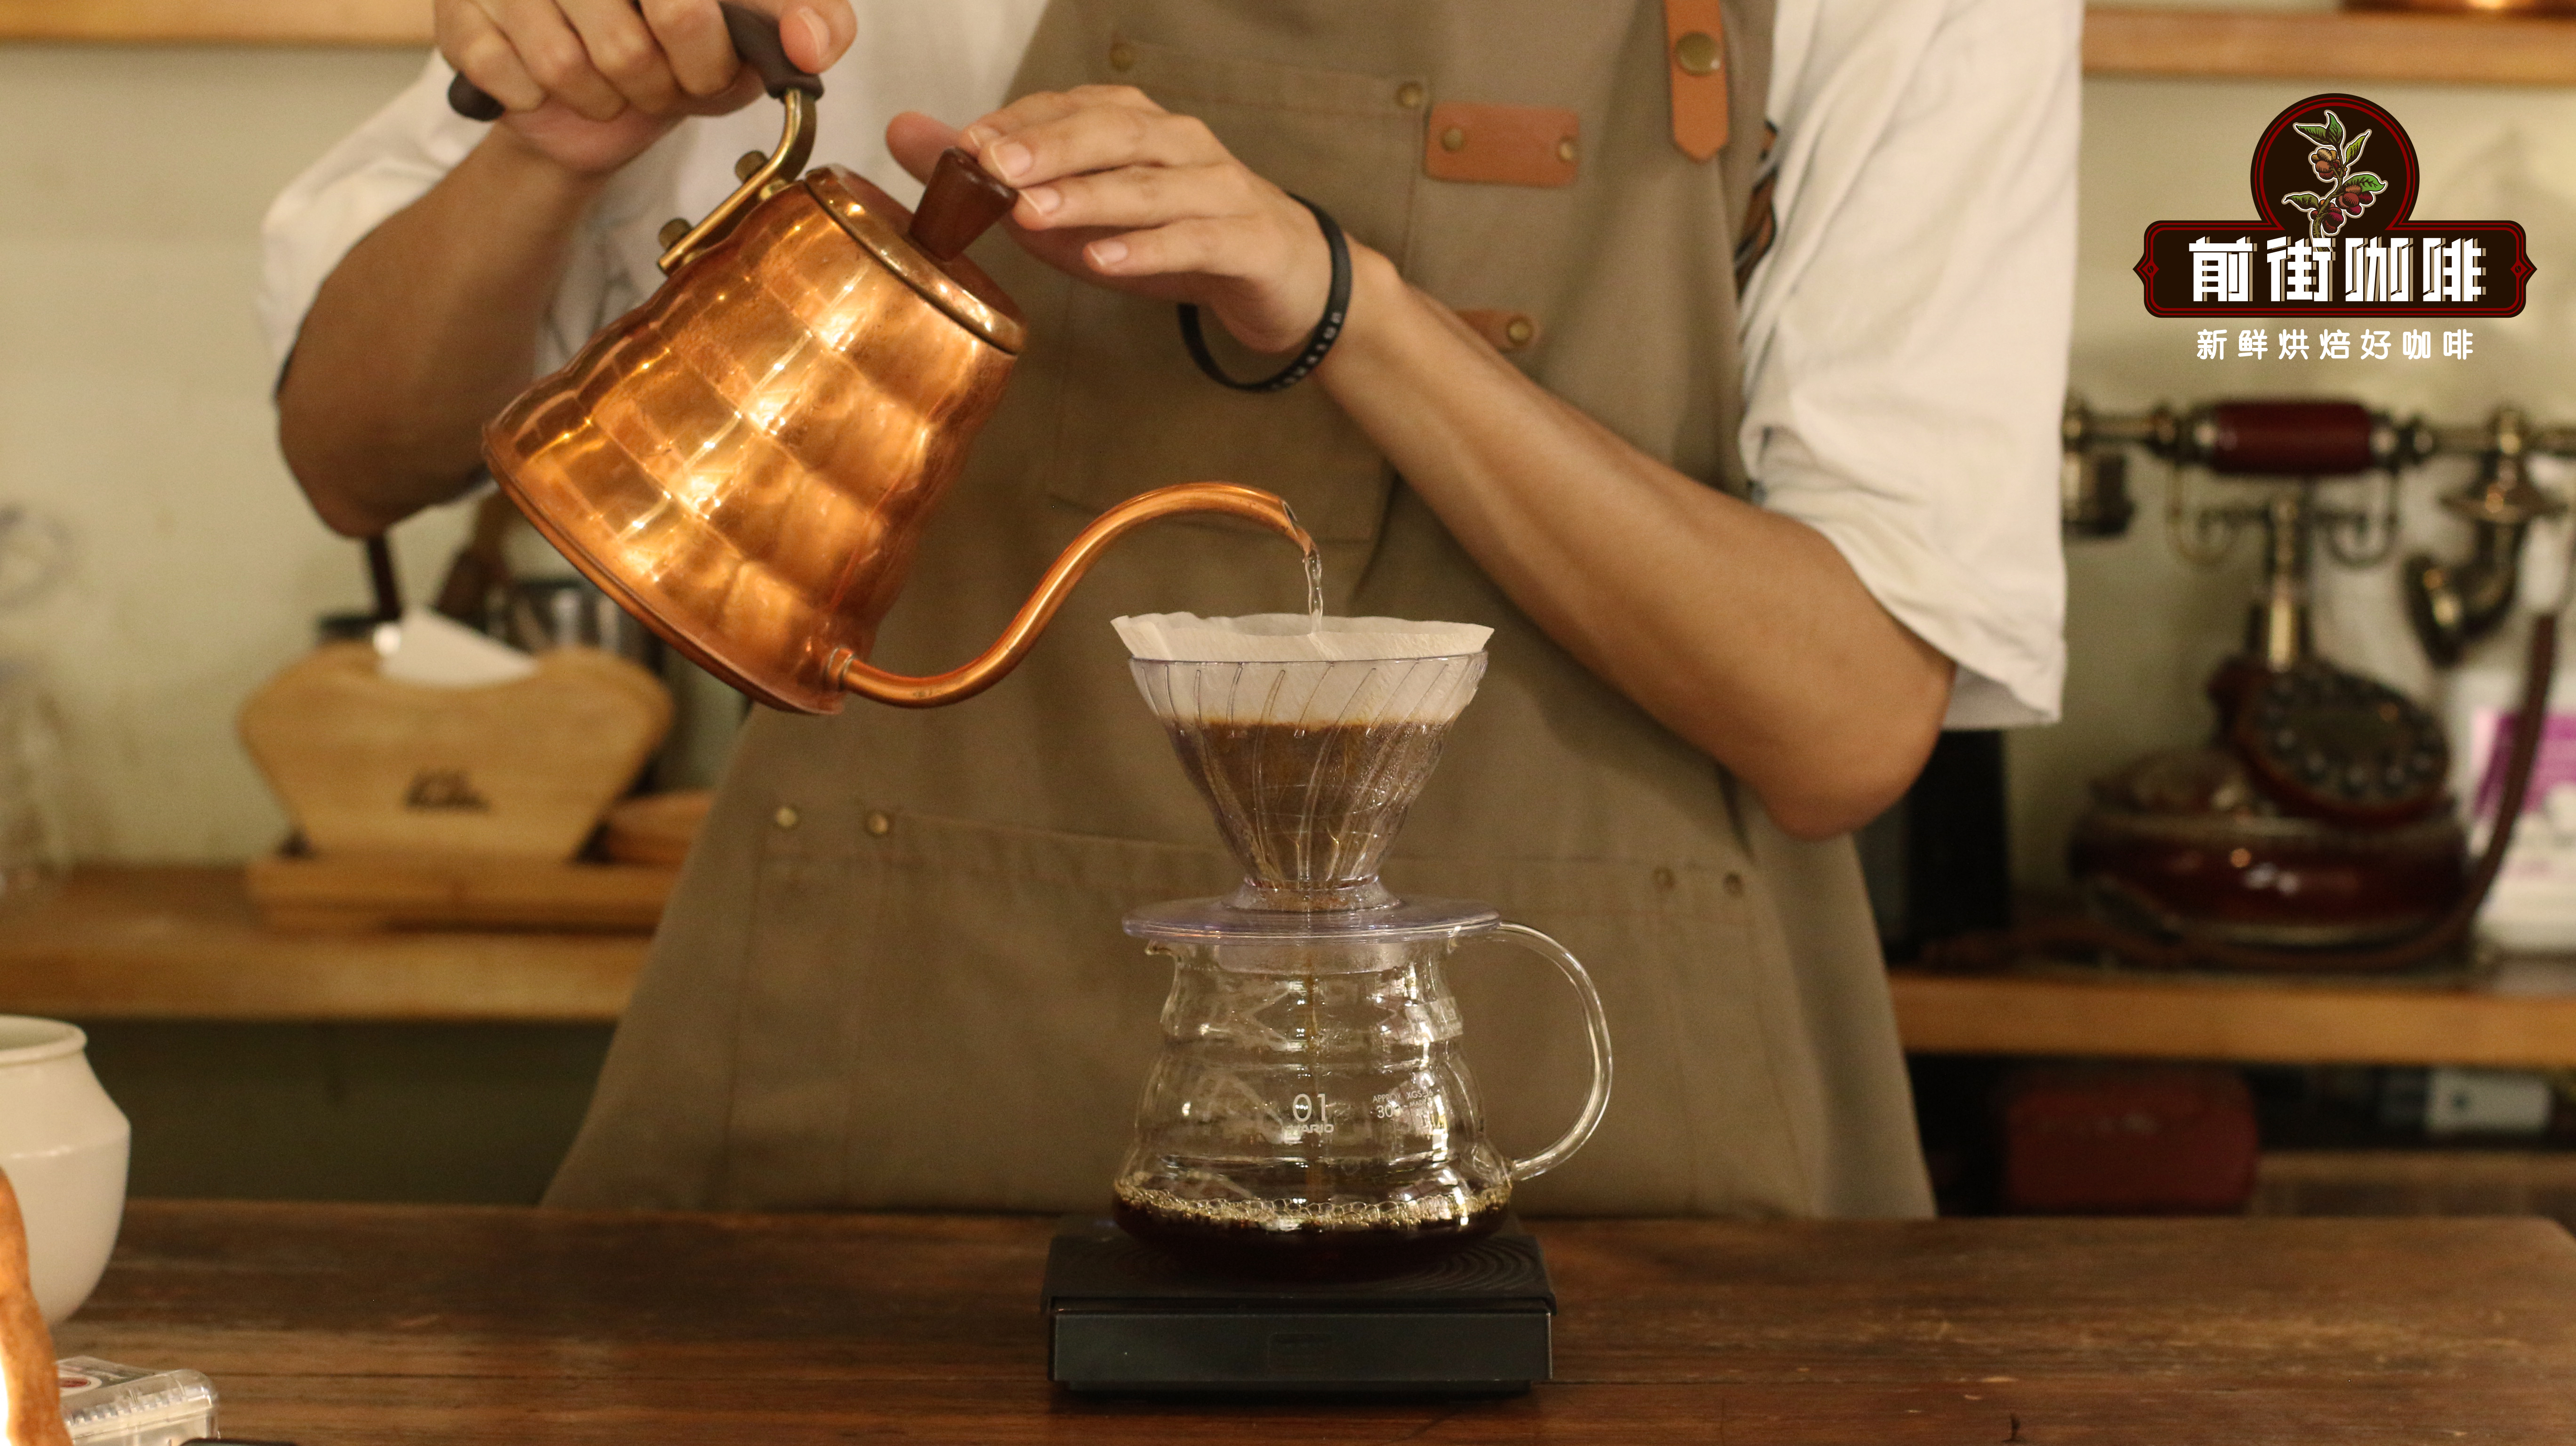 The historical origin of hand-brewed coffee who invented the use of coffee cup filter paper?